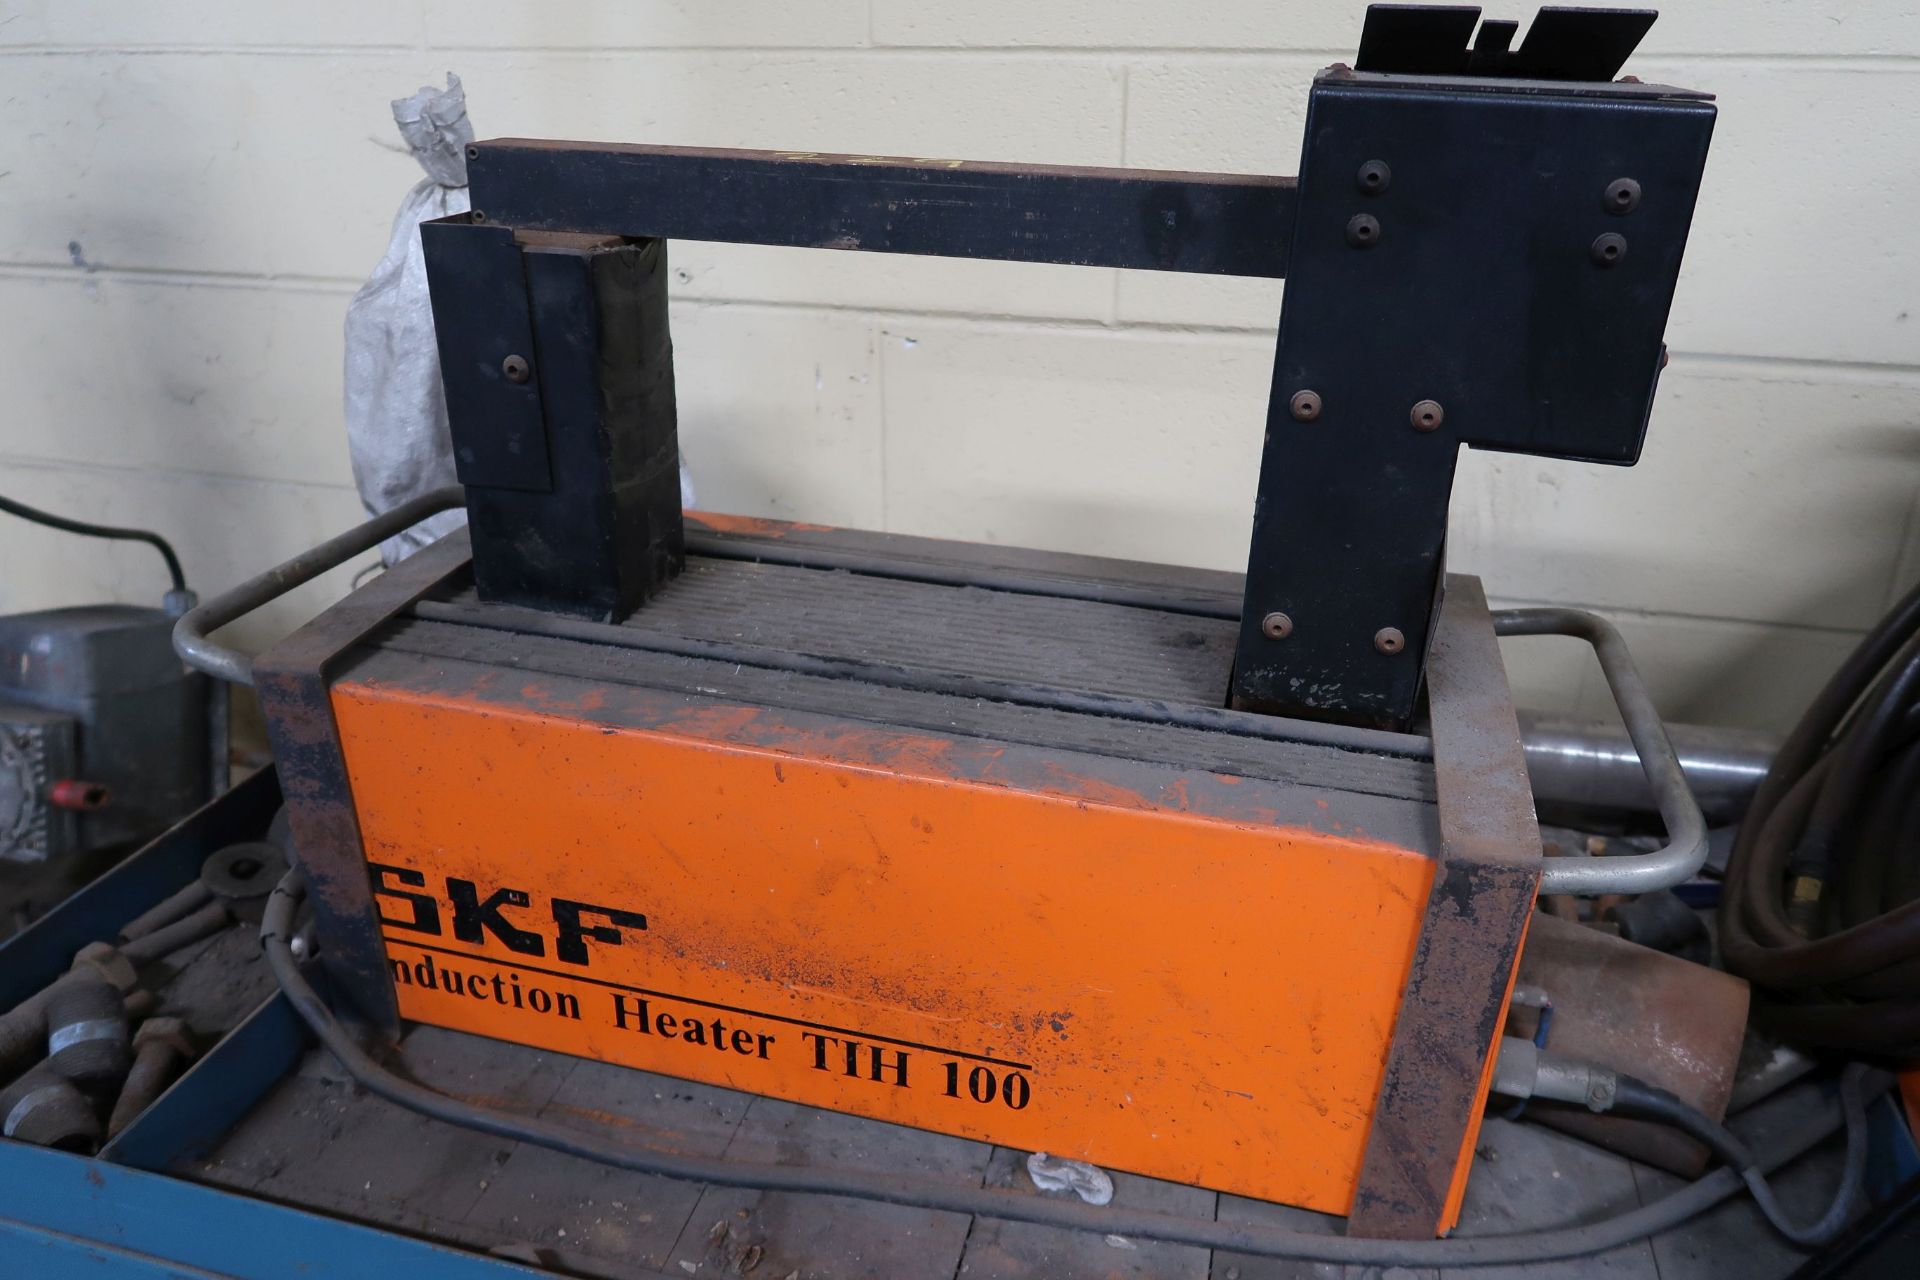 SKF MODEL T1H10 CART MOUNTED INDUCTION HEATER - Image 2 of 3